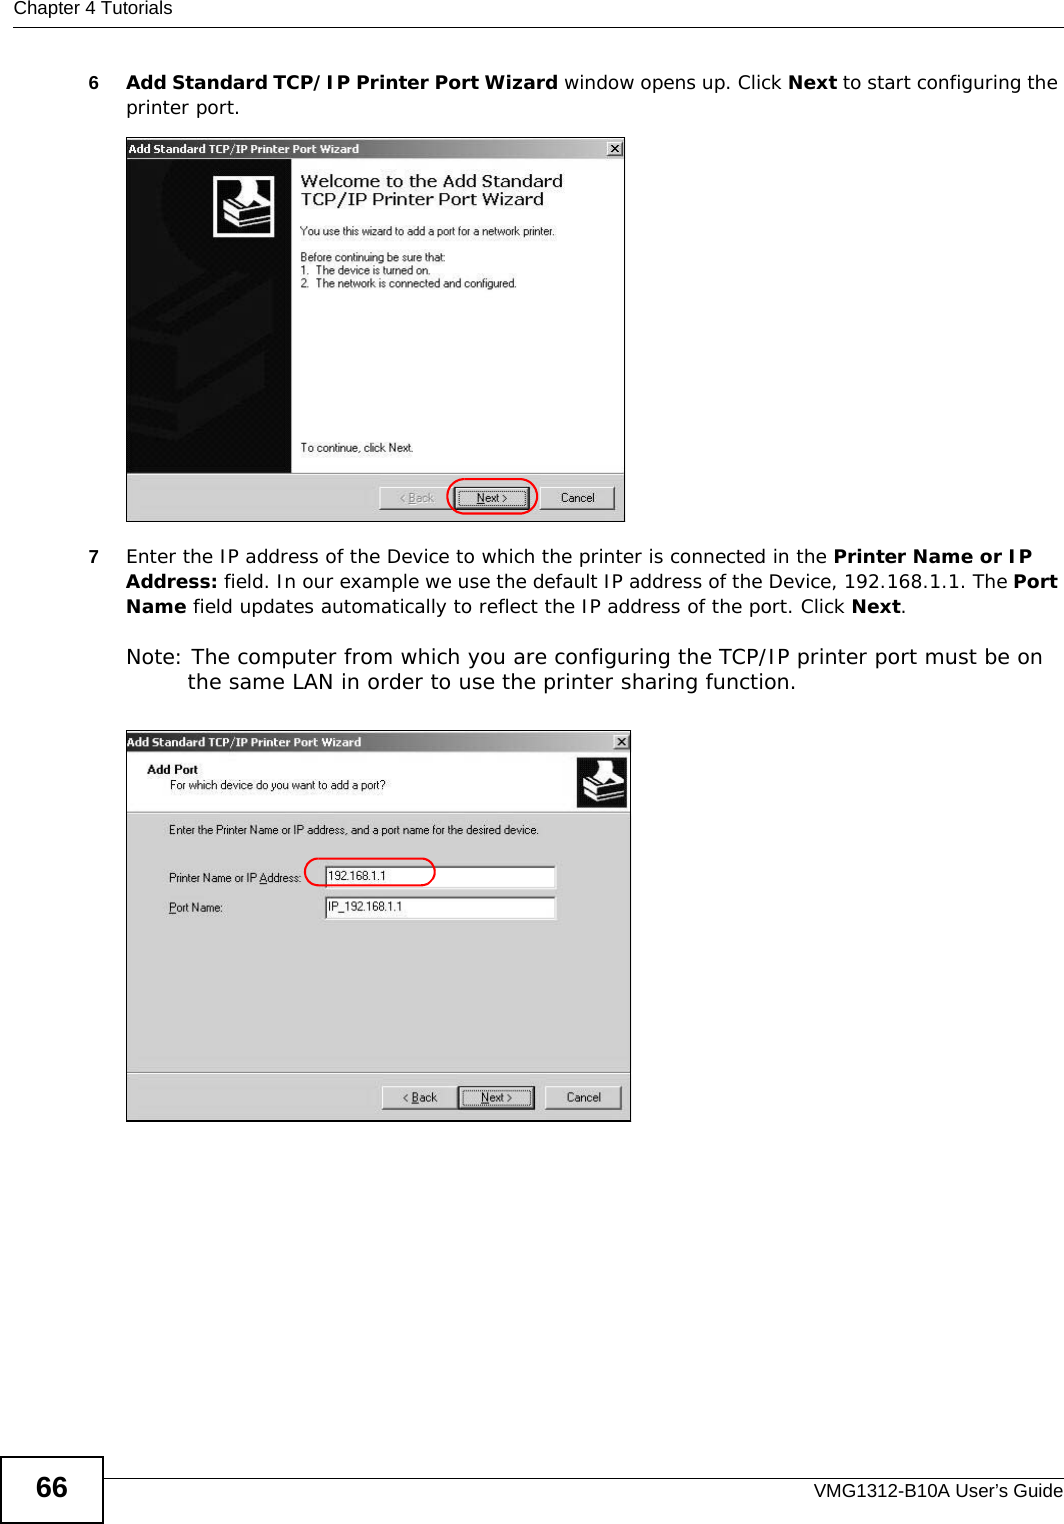 Chapter 4 TutorialsVMG1312-B10A User’s Guide666Add Standard TCP/IP Printer Port Wizard window opens up. Click Next to start configuring the printer port.Tutorial: Add a Port Wizard7Enter the IP address of the Device to which the printer is connected in the Printer Name or IP Address: field. In our example we use the default IP address of the Device, 192.168.1.1. The Port Name field updates automatically to reflect the IP address of the port. Click Next.Note: The computer from which you are configuring the TCP/IP printer port must be on the same LAN in order to use the printer sharing function.Tutorial: Enter IP Address of the Device